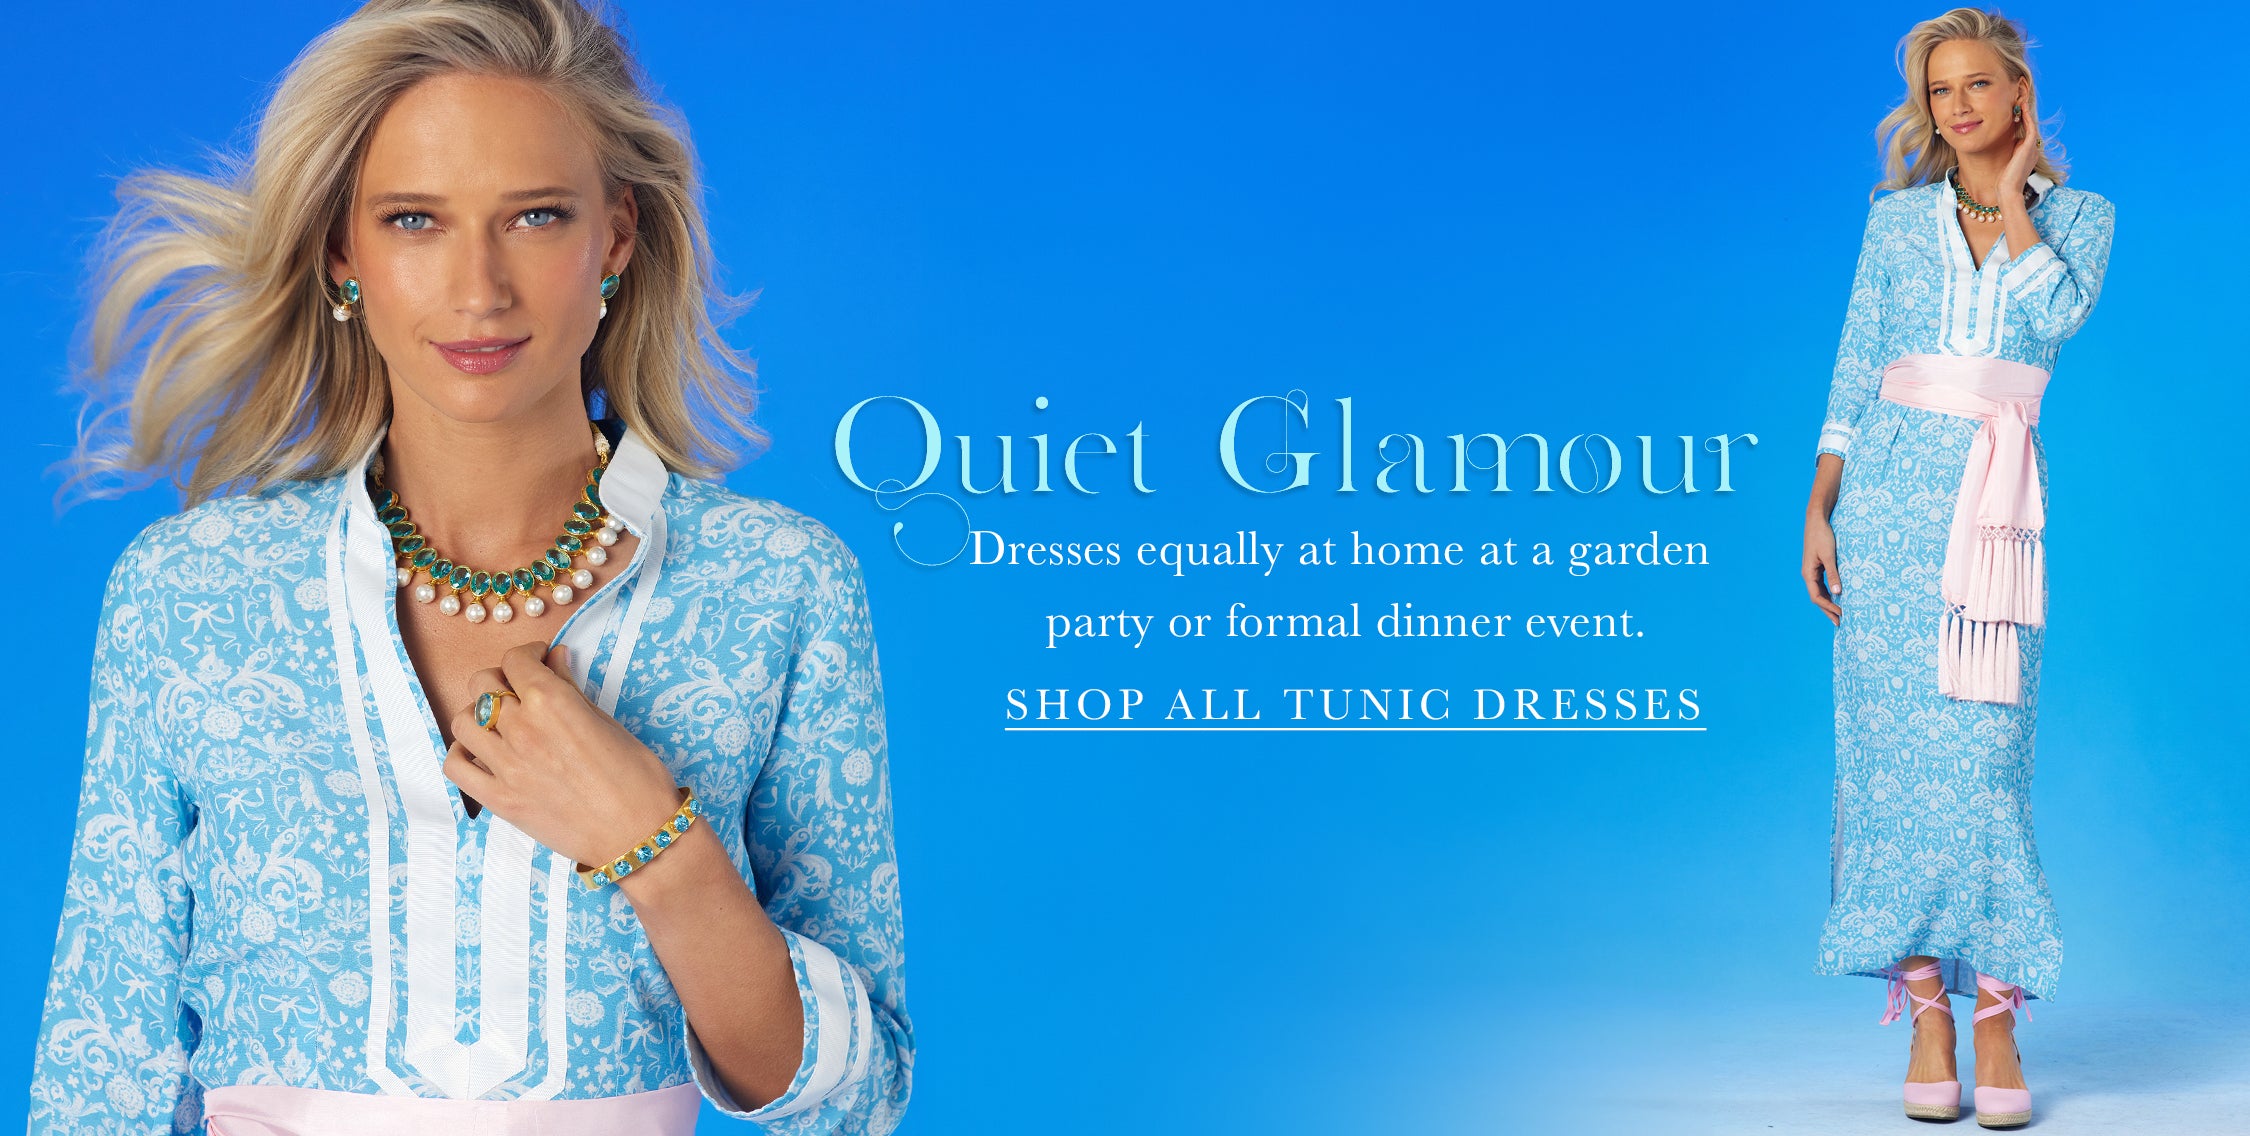 Regency tunic dress is featured on the banner. Quiet Glamour. Dresses that are equally at home at a garden party or formal dinner event. Click to shop all tunic dresses.